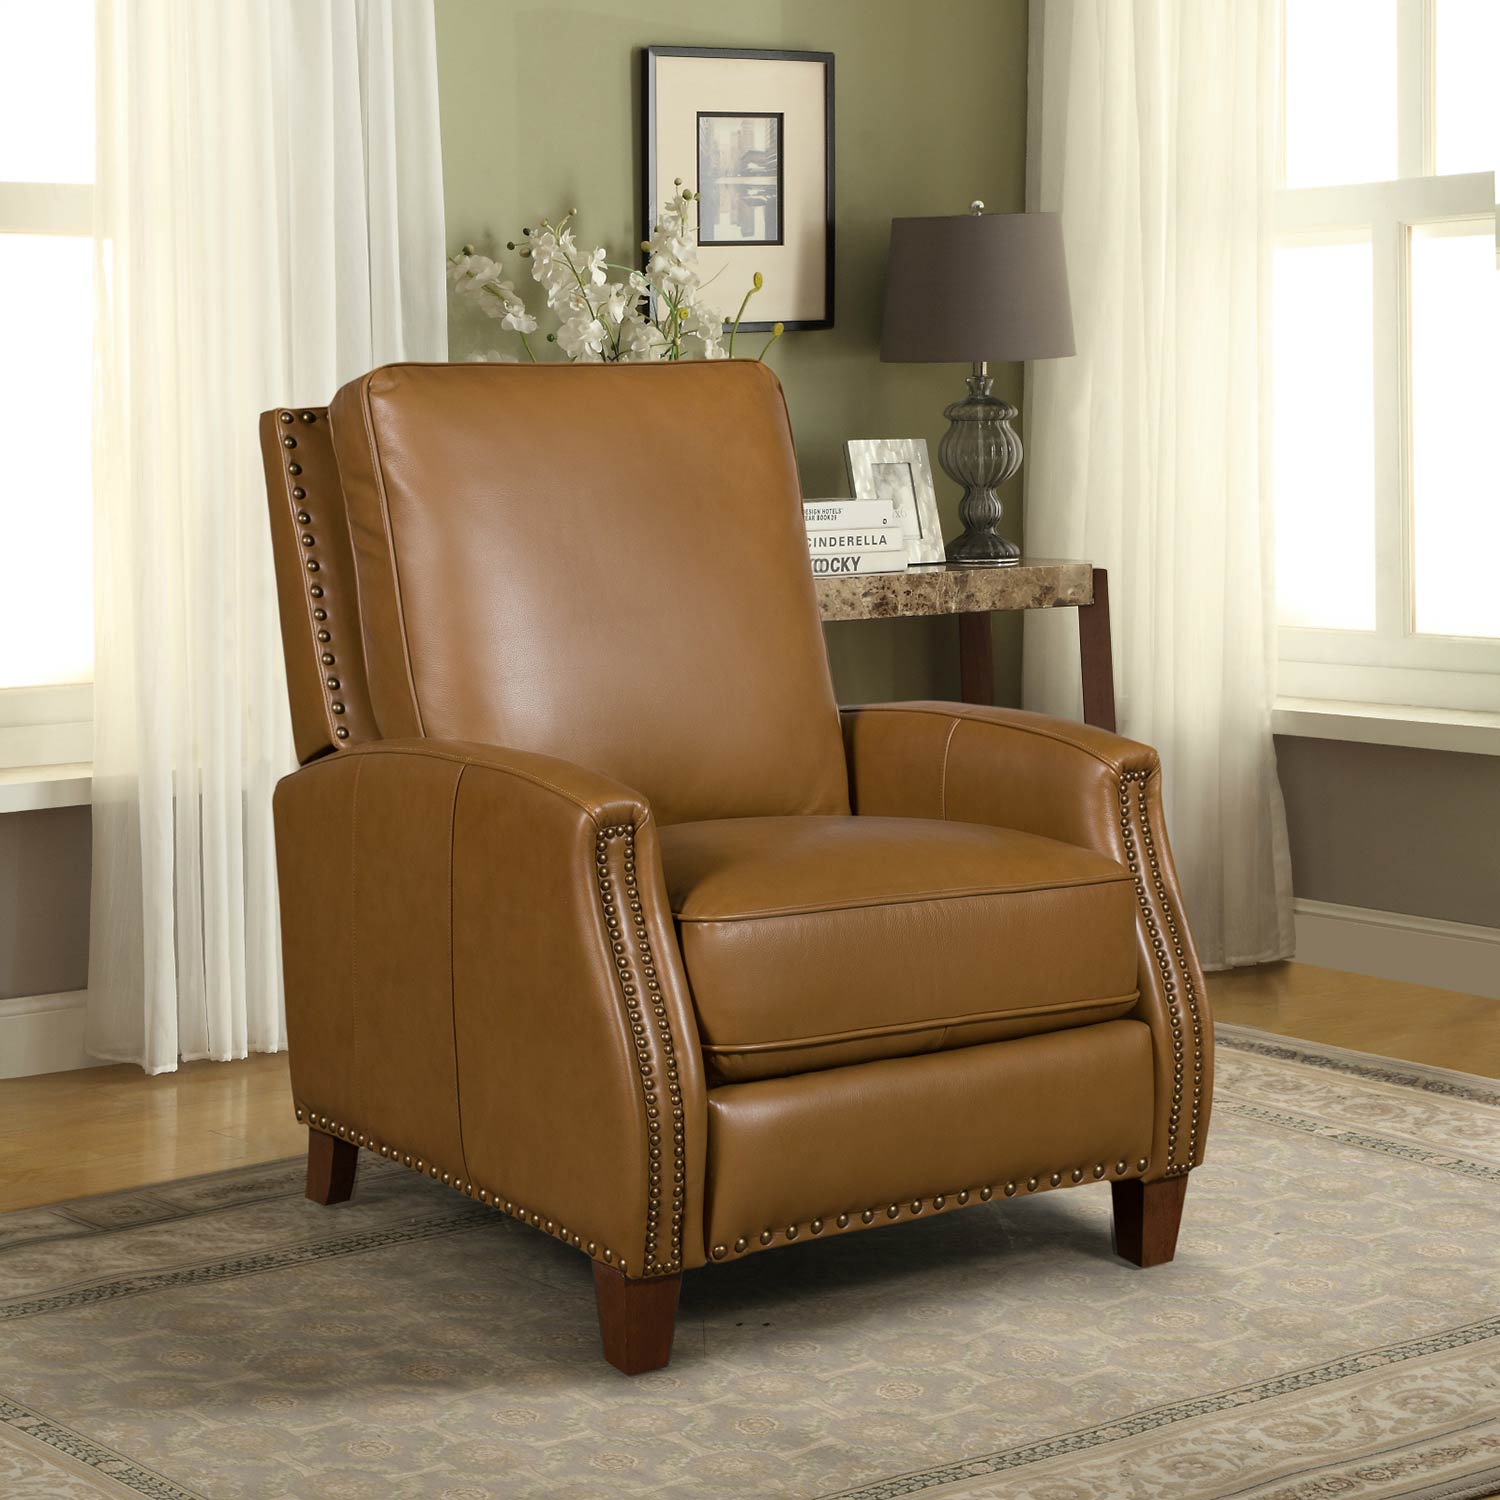 Barcalounger Melrose Recliner Chair - Shoreham Ponytail/All Leather